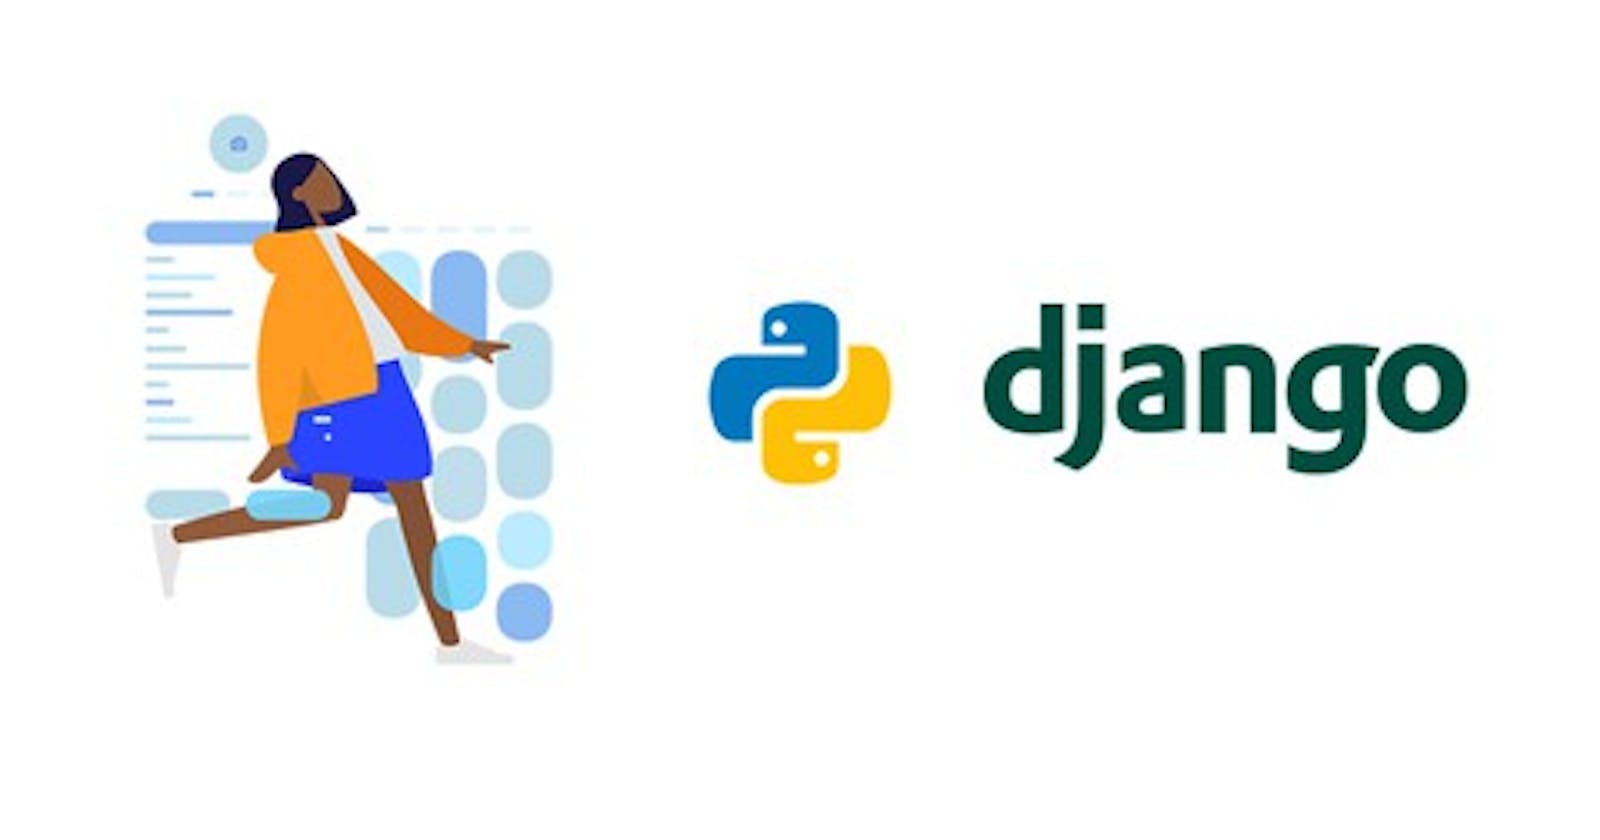 Making Web Pages in Django